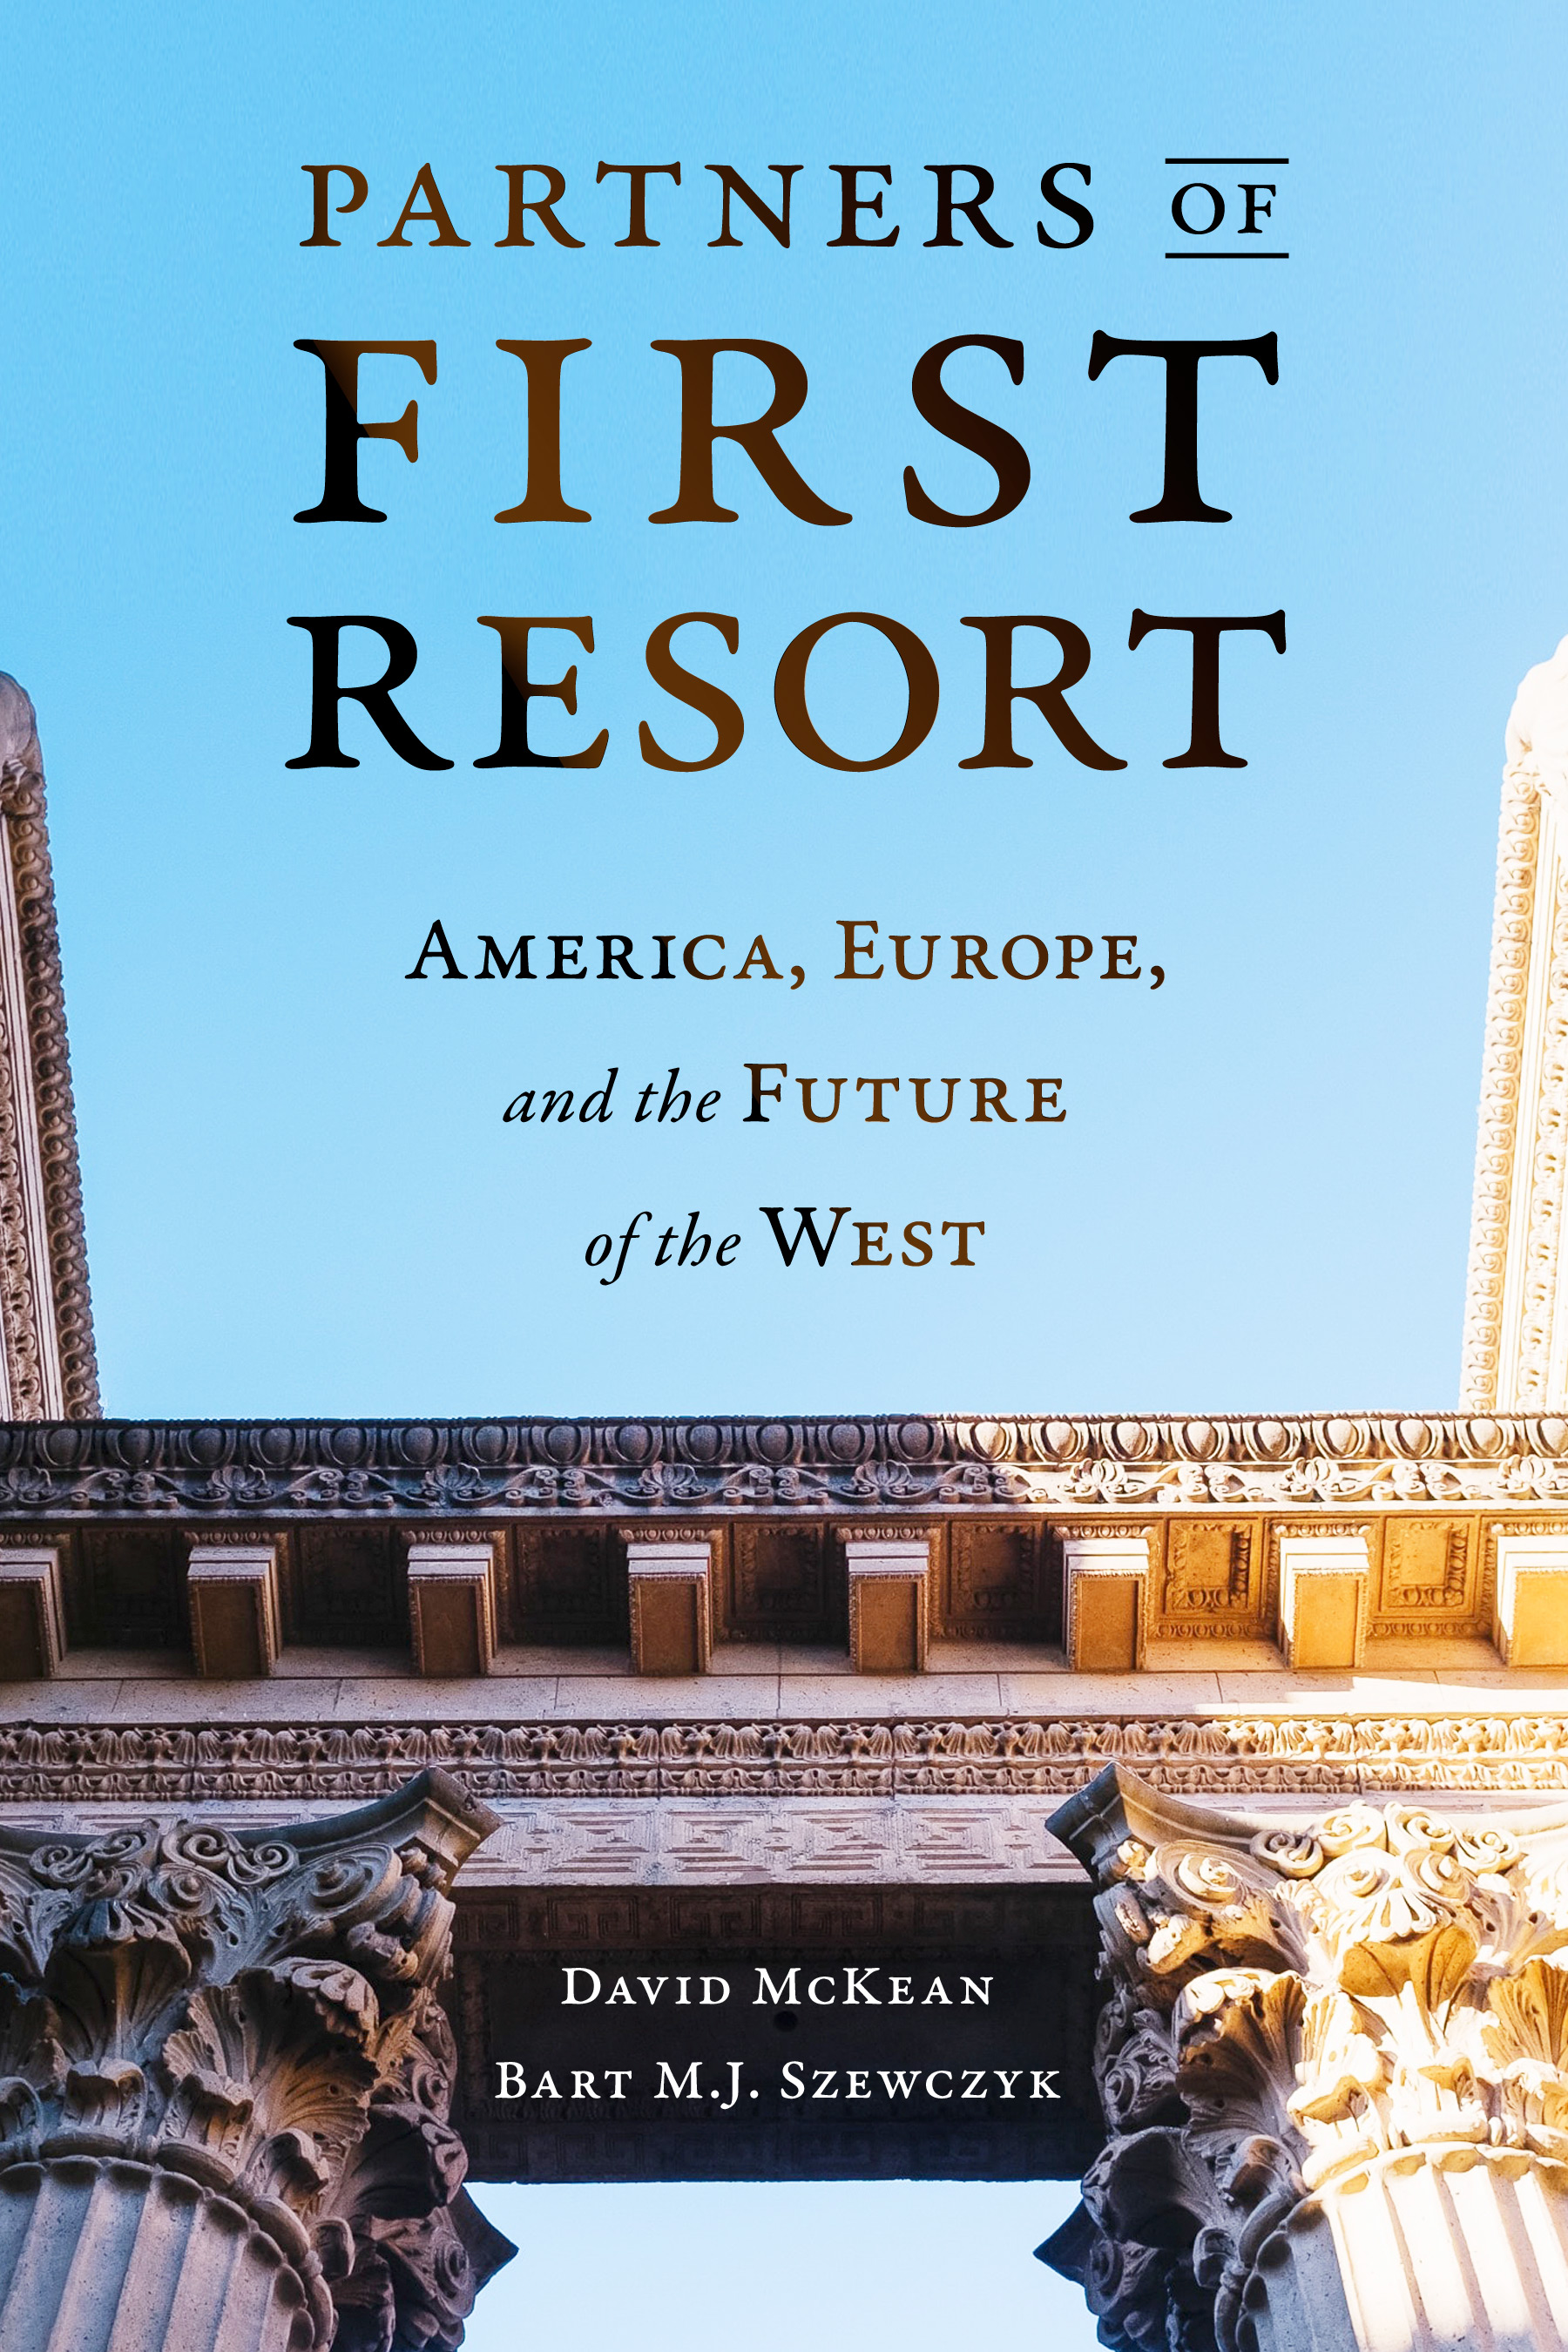 Partners of First Resort: America, Europe, and the Future of the West